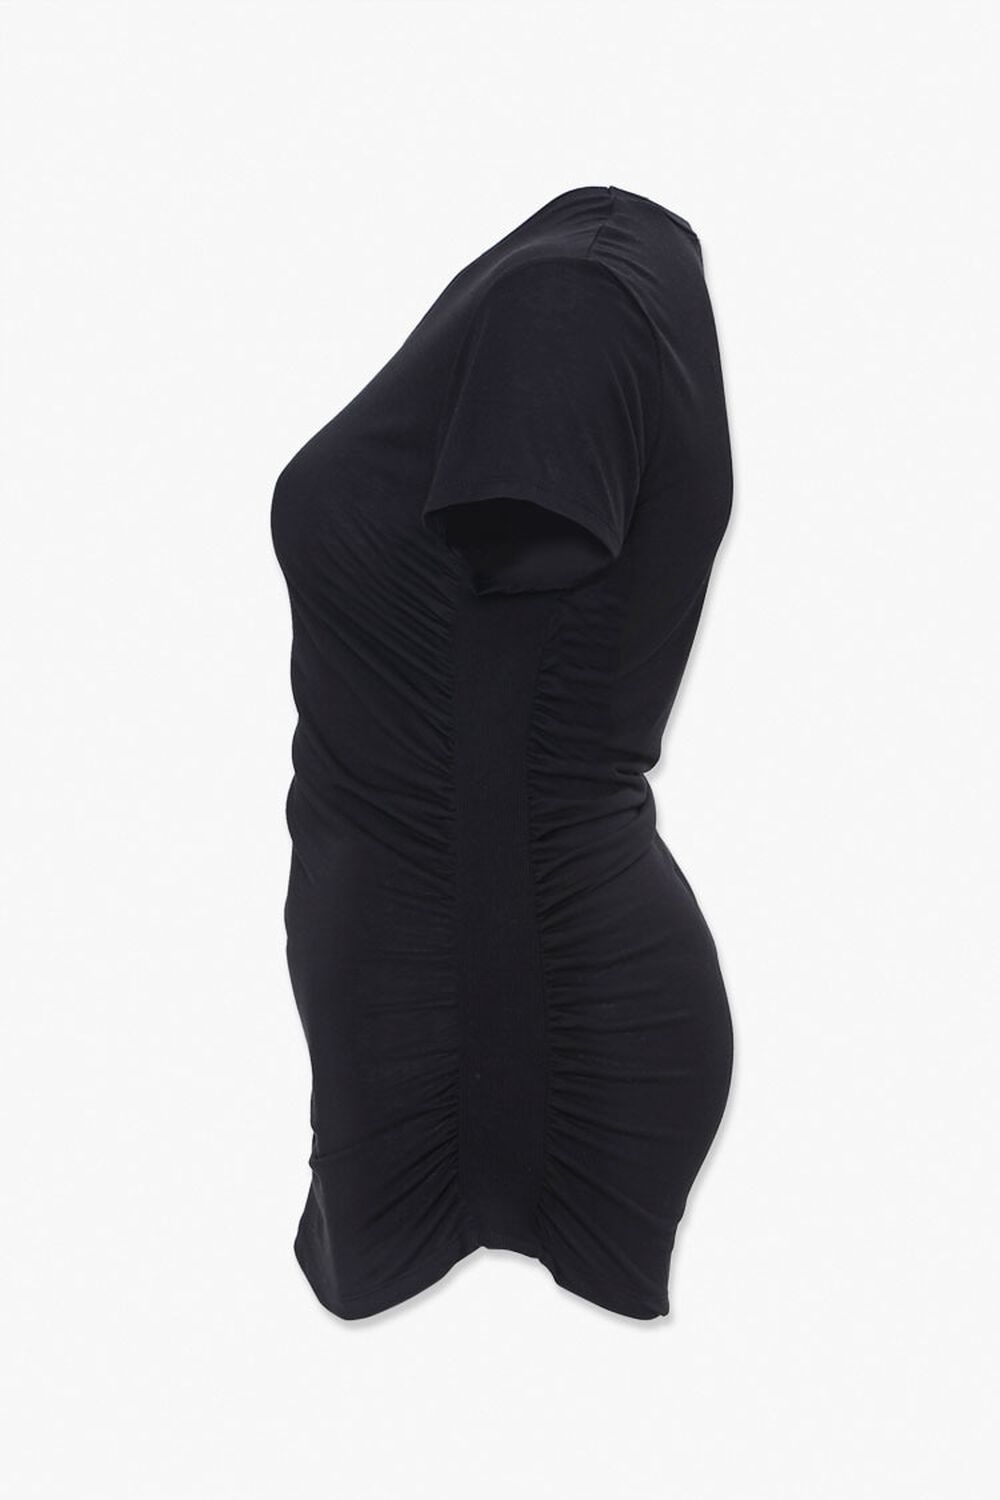 Plus Size Ruched Tee, image 2